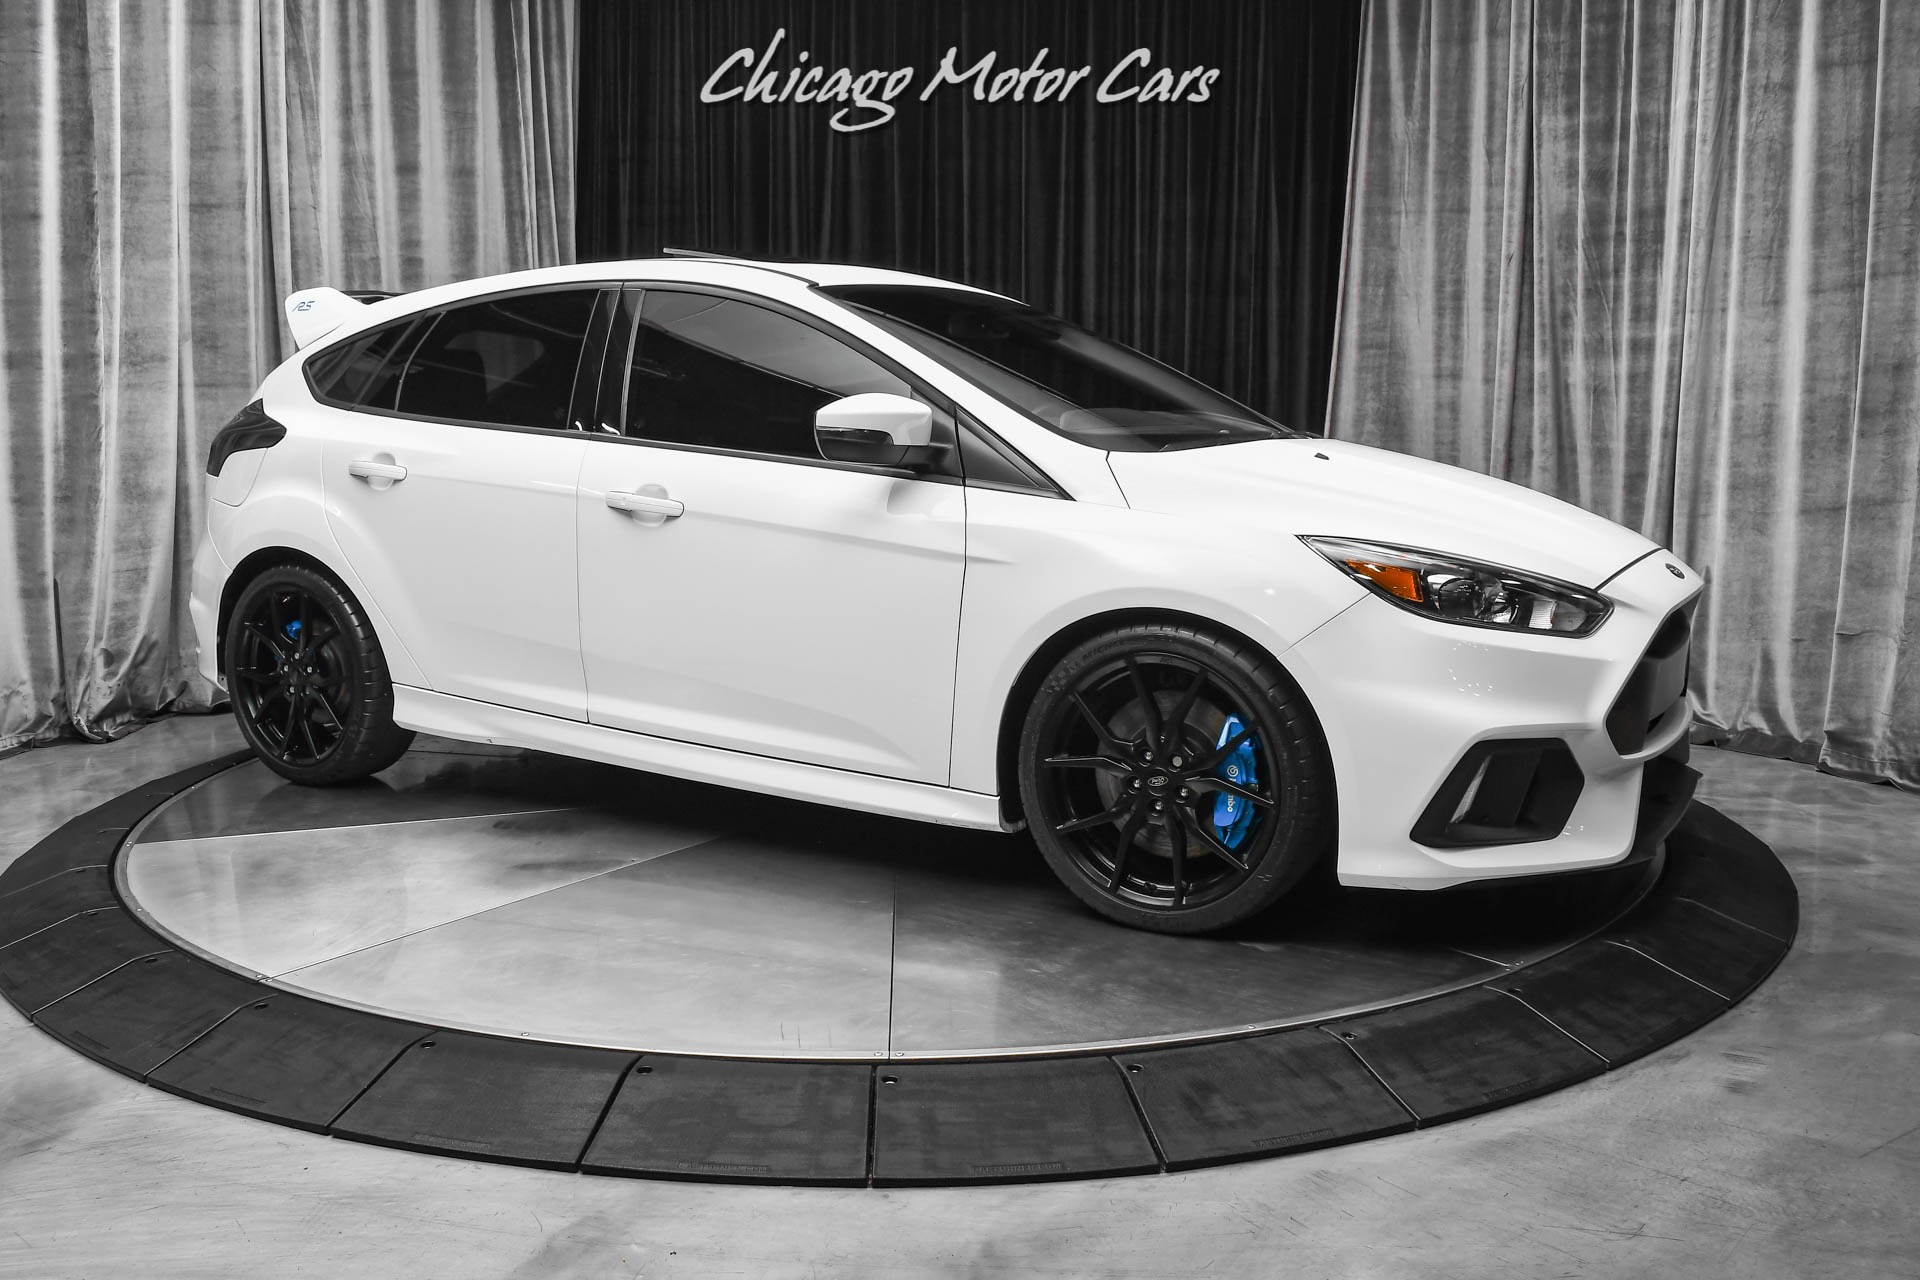 Used-2016-Ford-Focus-RS-Hatchback-Frozen-White-RS2-PACKAGE-6-Speed-Manual-Stunning-Condition